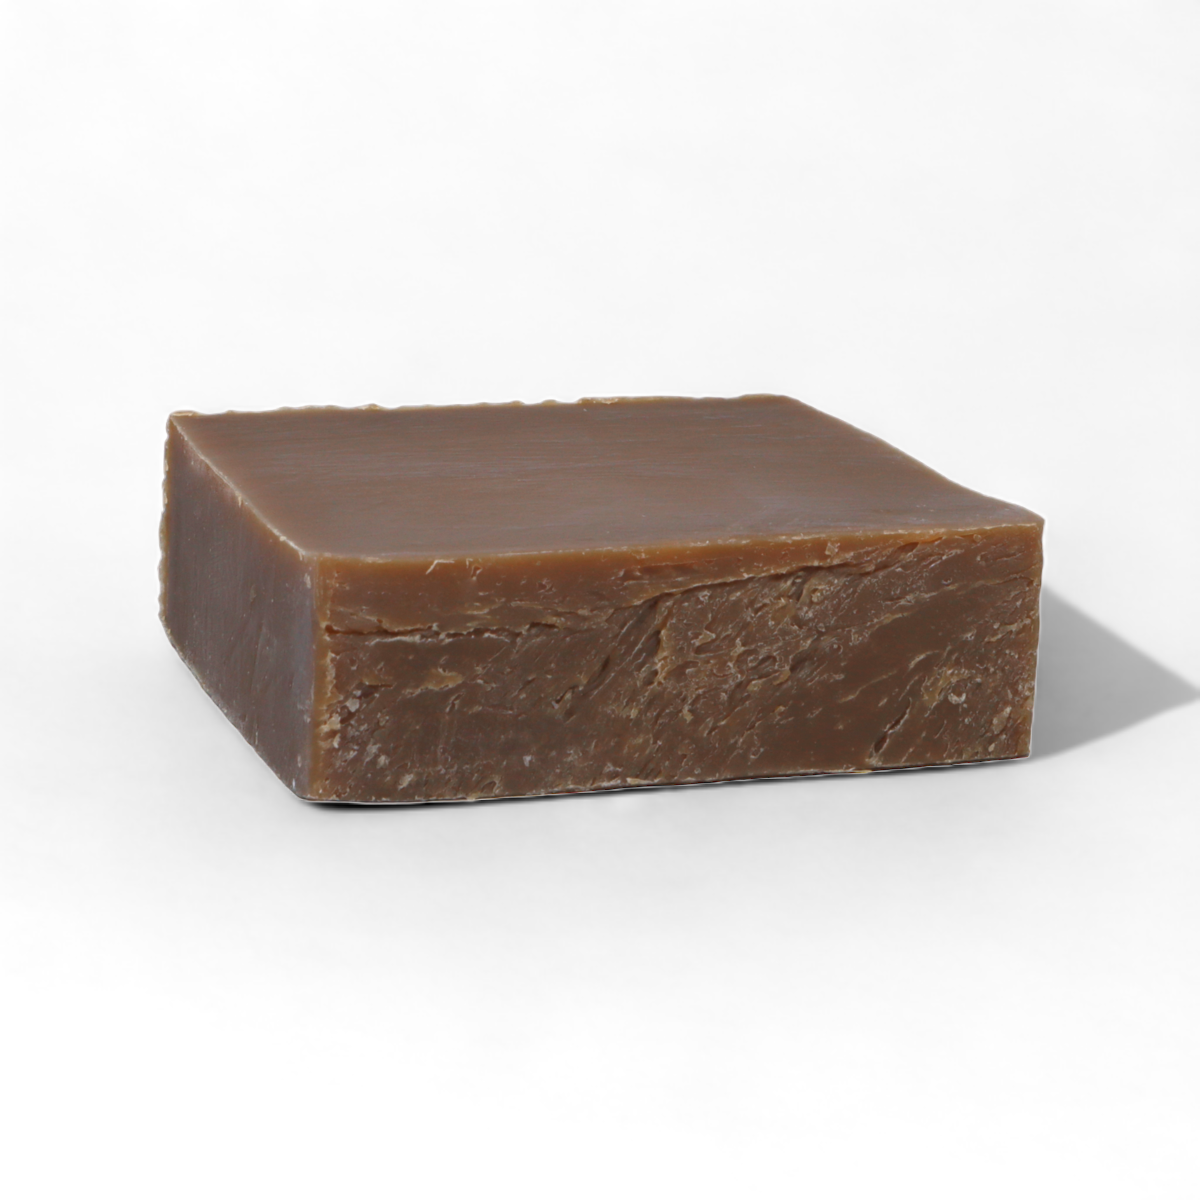 Pine Tar Soap, All Natural, Handmade, Cold Process Soap, Itchy